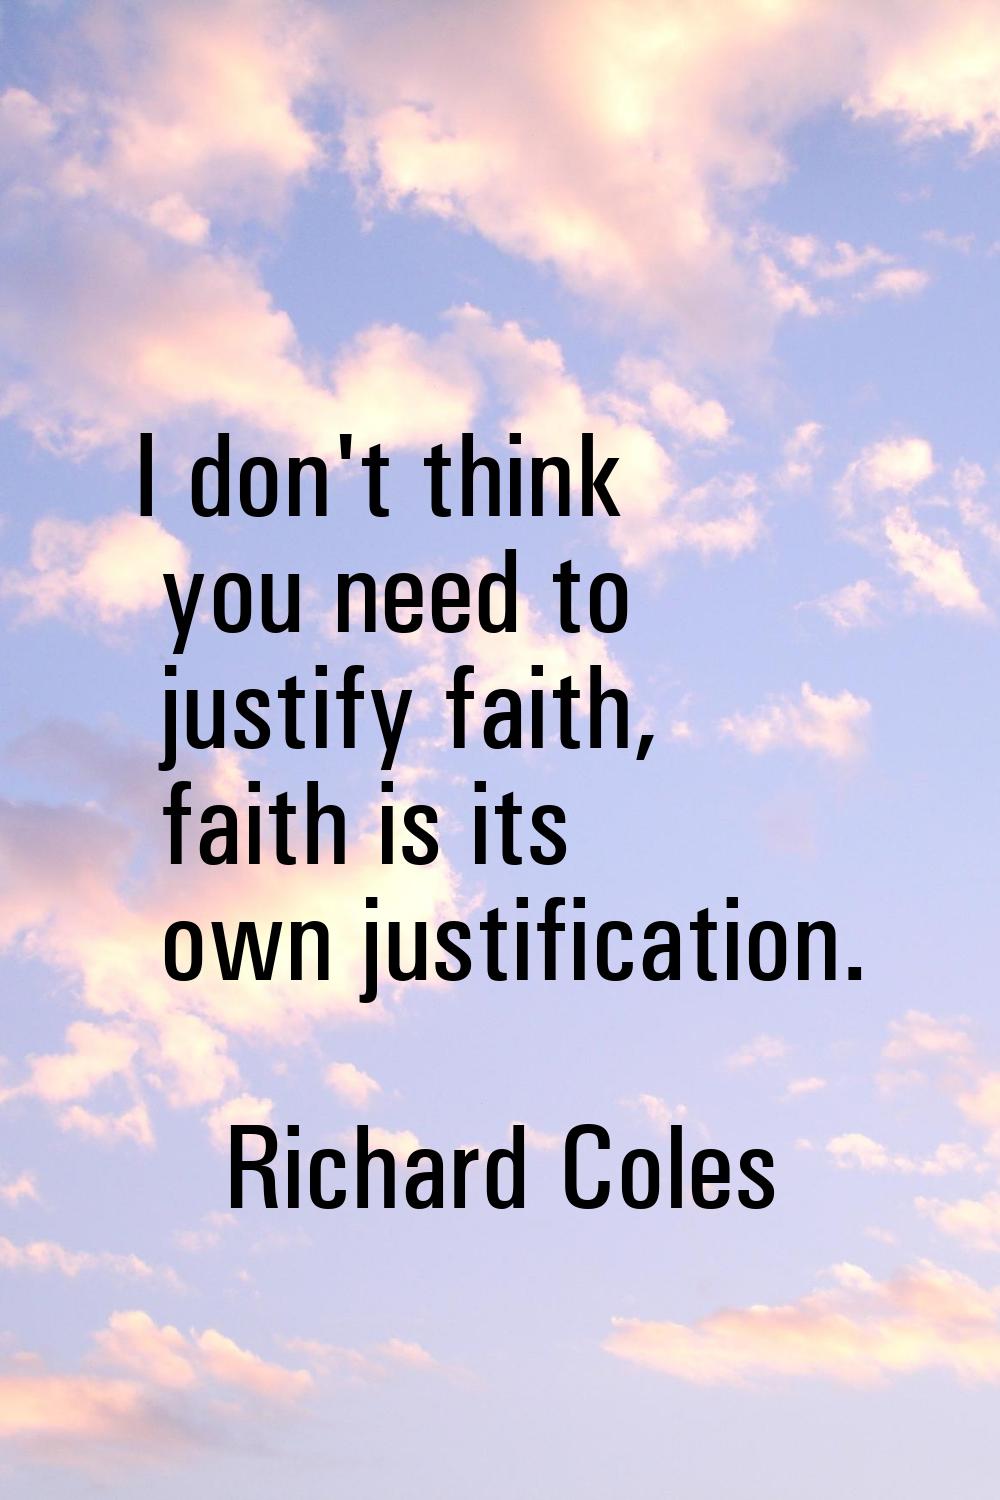 I don't think you need to justify faith, faith is its own justification.